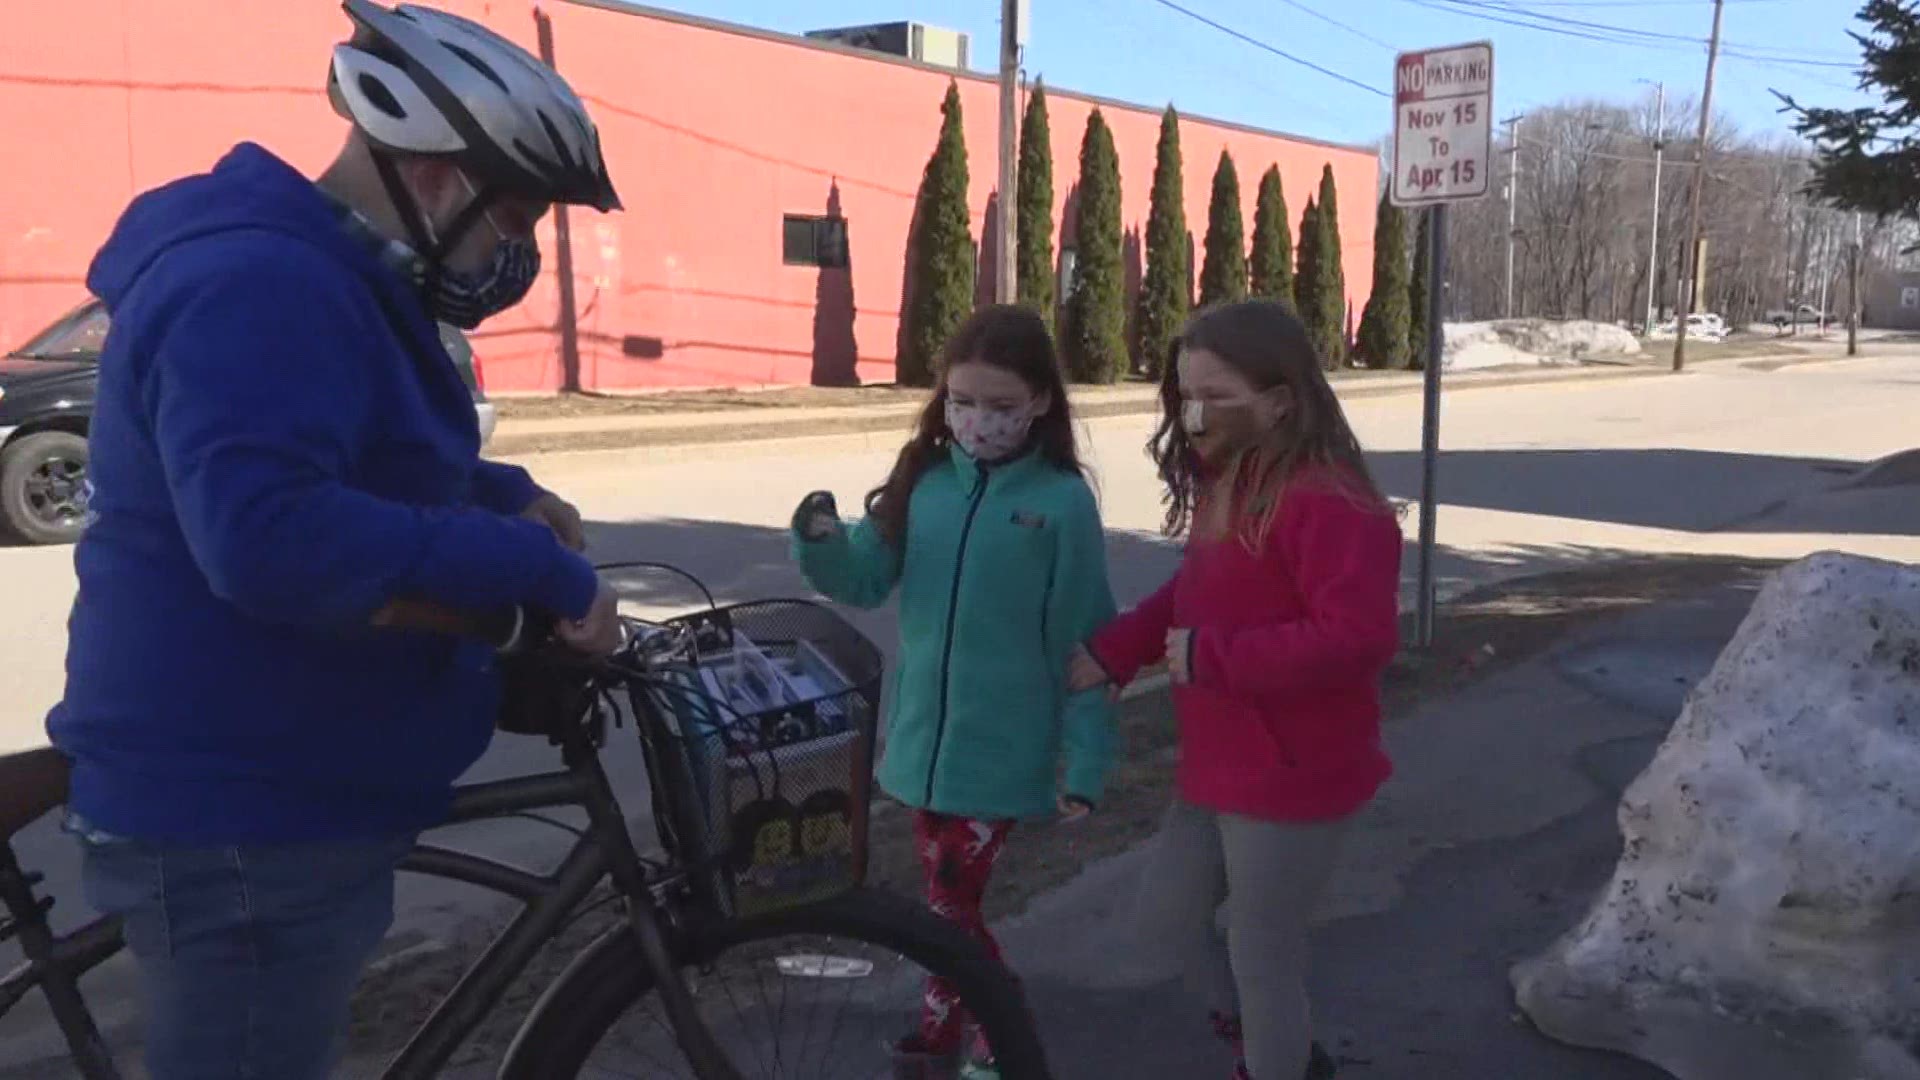 With a little help from the community in the form of a bicycle donation, teachers and administrators have been making the rounds with a basket of books.